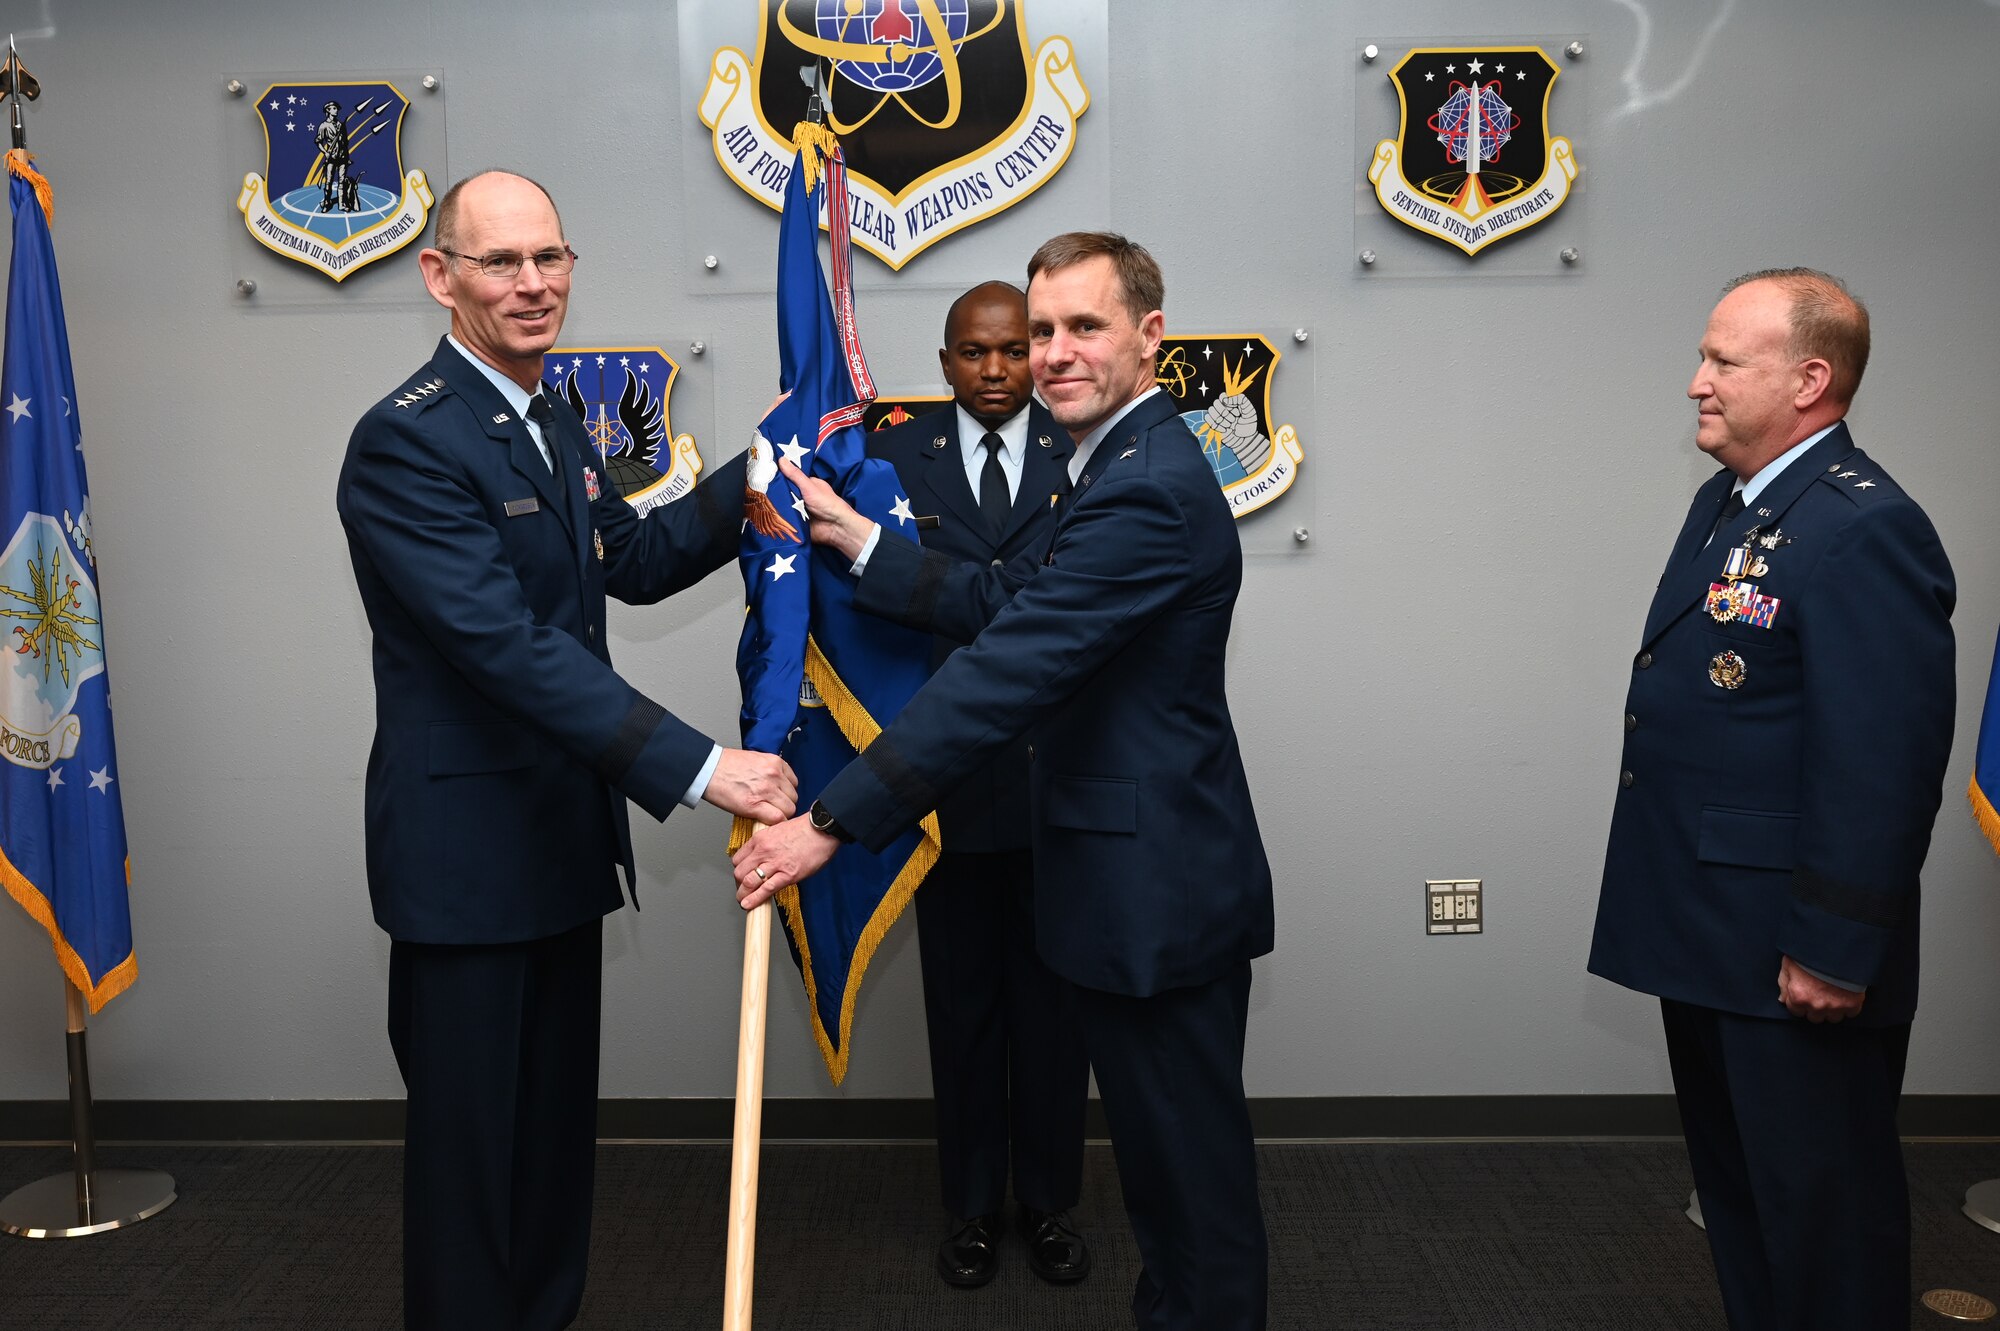 Gen. Duke Z. Richardson (left), commander of Air Force Materiel Command, hands the Air Force Nuclear Weapons Center flag to Brig. Gen. John P. Newberry, incoming AFNWC commander, during the change of command from Maj. Gen. Anthony W. Genatempo (right), outgoing commander, at Kirtland Air Force Base, New Mexico, June 21, 2022. Newberry previously served as program executive officer for bombers and director of the Air Force Life Cycle Management Center’s Bombers Directorate at Wright-Patterson Air Force Base, Ohio. (U.S. Air Force photo by Staff Sgt. Miranda Loera)